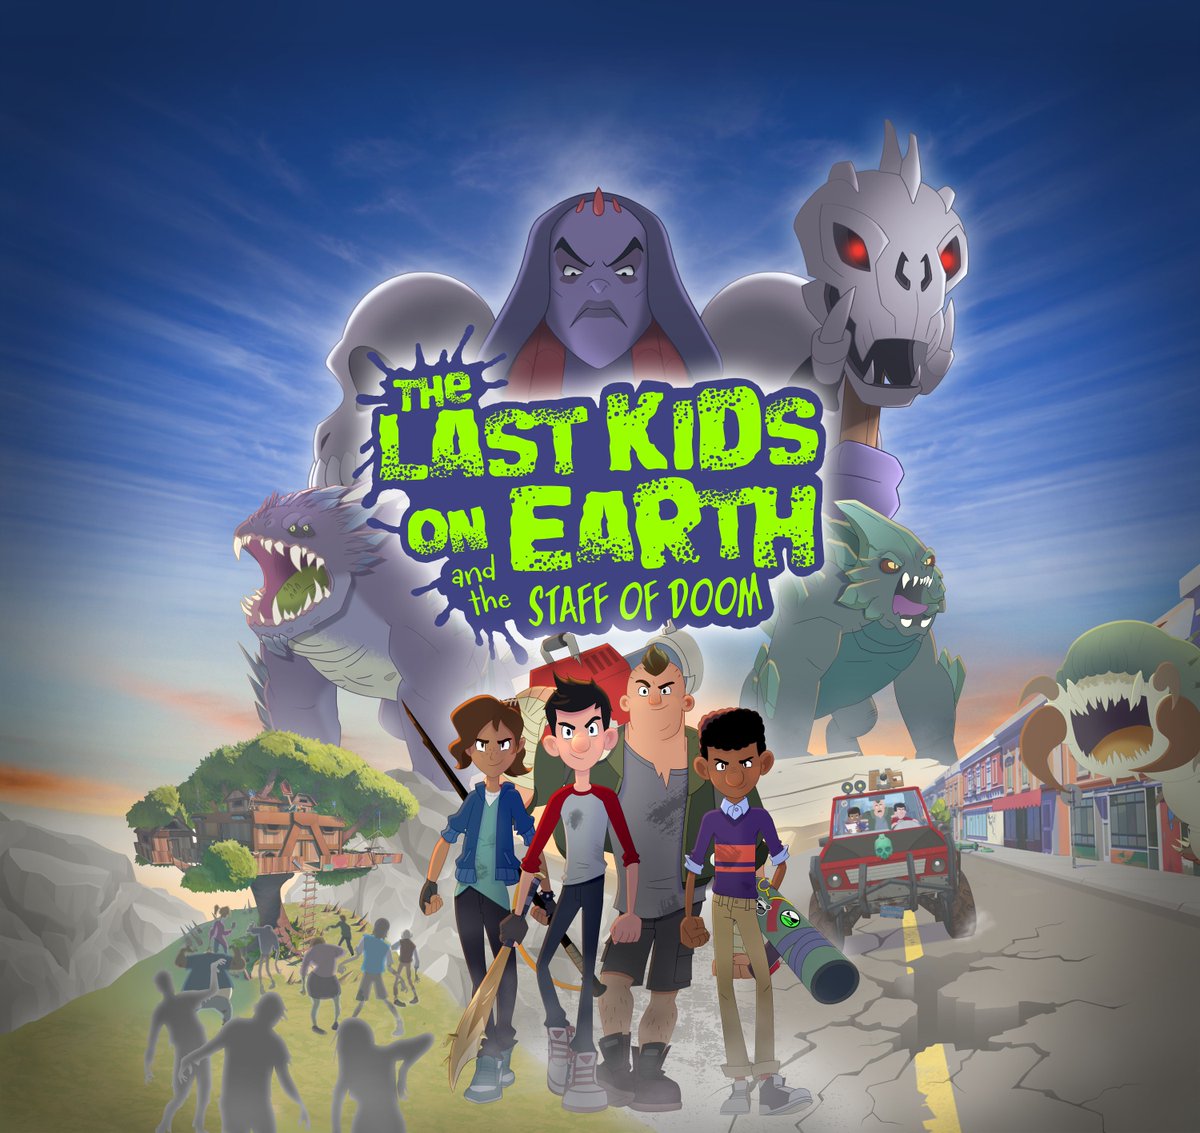 Happy National Video Game Day! 🎮🧟‍♂️ Have you played 'The Last Kids on Earth and The Staff of Doom?' Join Jack and his friends in an epic, post-apocalyptic quest to save the world from zombie hordes and slime monsters! #TheLastKidsOnEarthAndTheStaffOfDoom